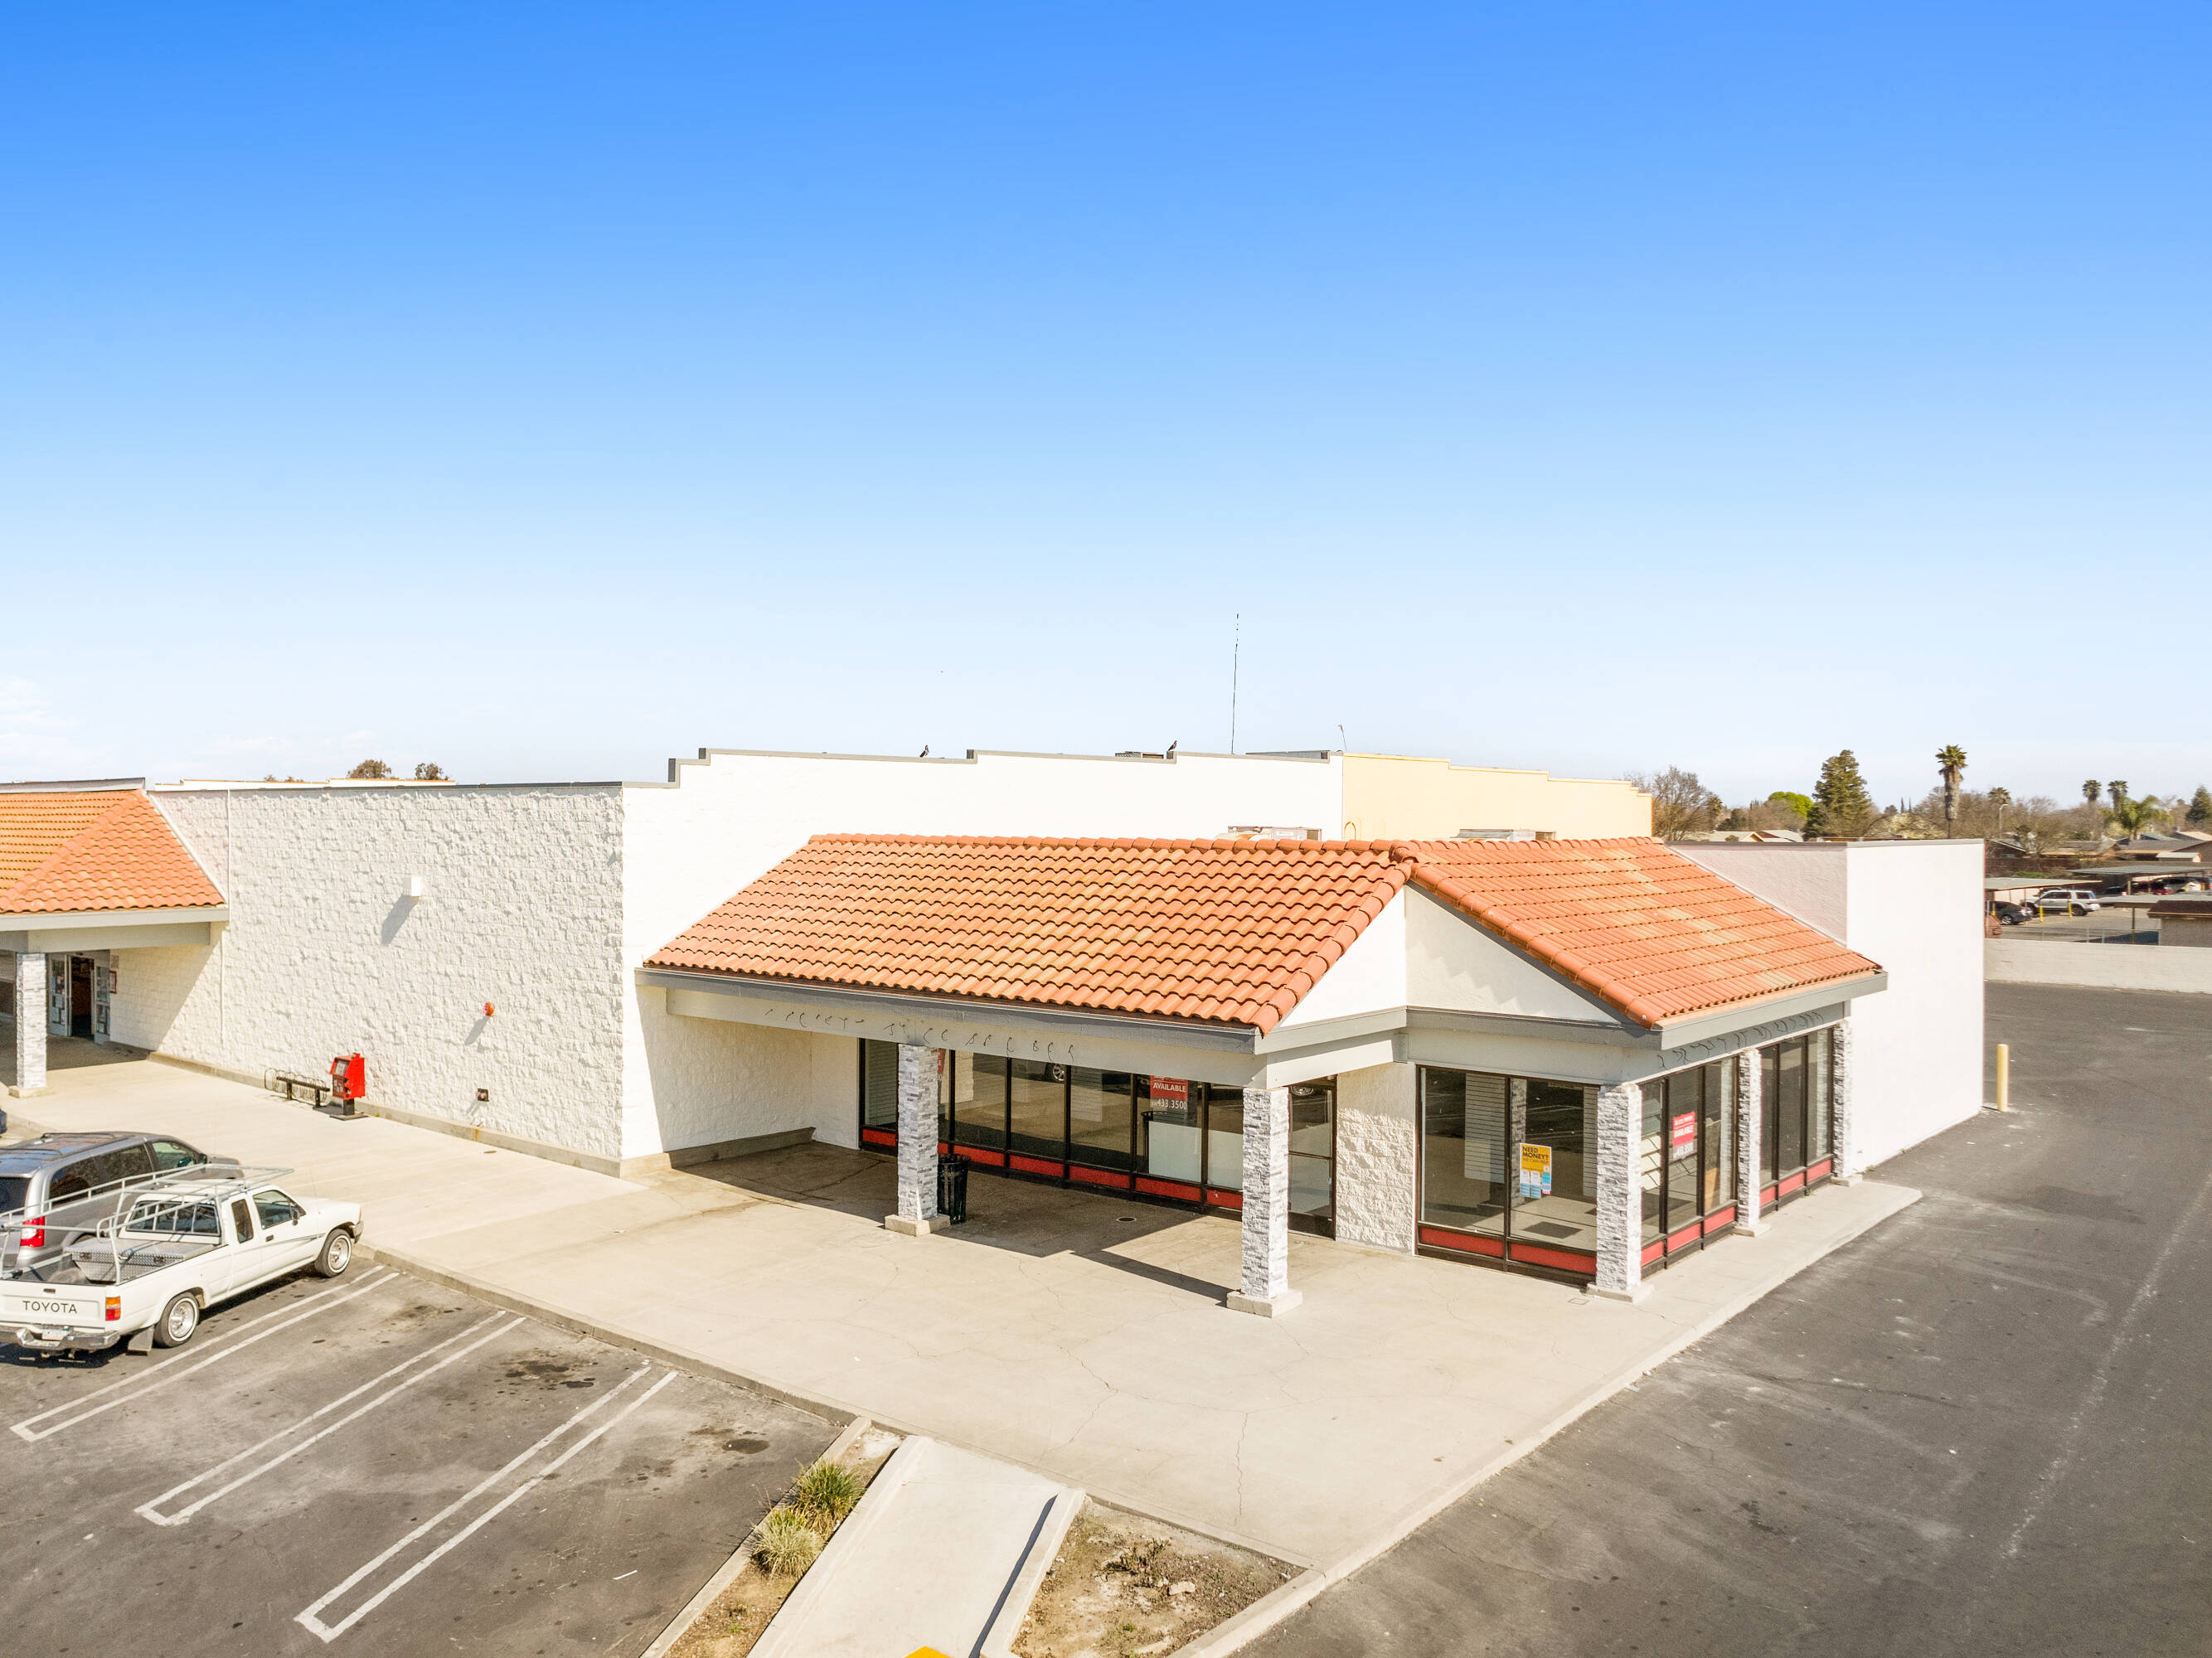 Rhino Investments Group Announces Sale of Prime Retail Property in Madera, CA